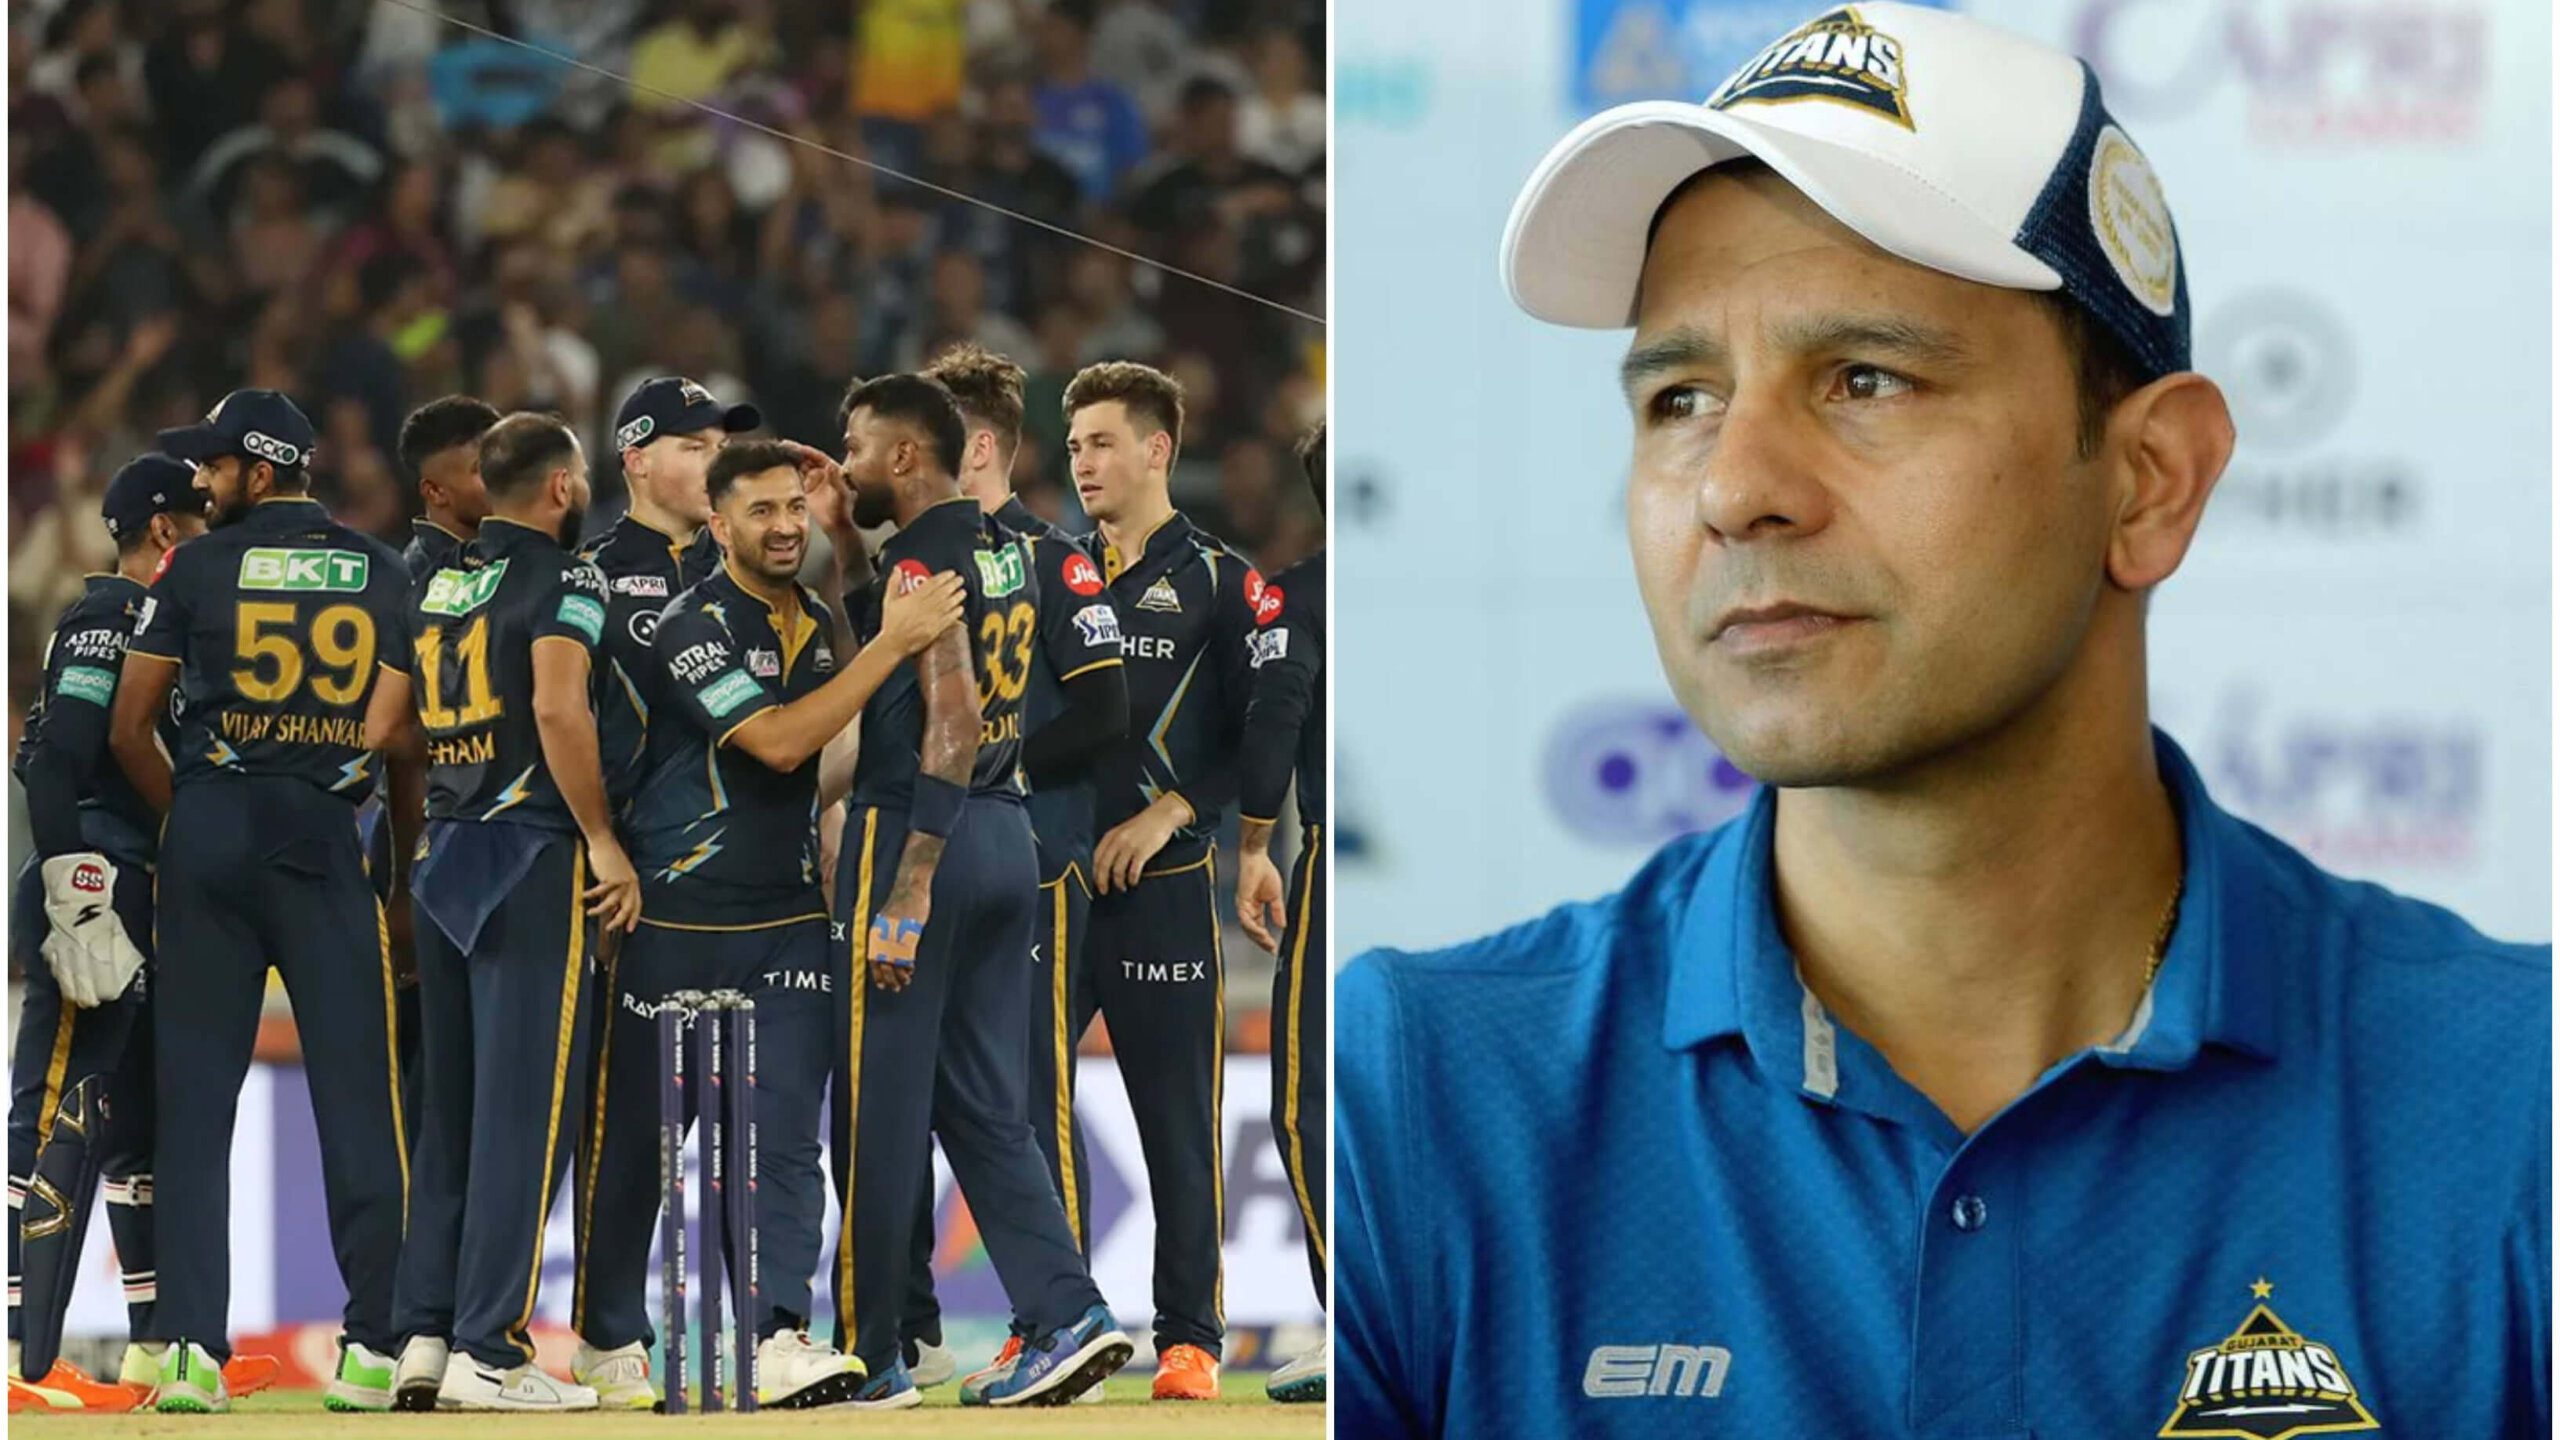 GT team director Vikram Solanki said after losing the IPL 2023 final, "We did all that we could, took the game to the last ball."